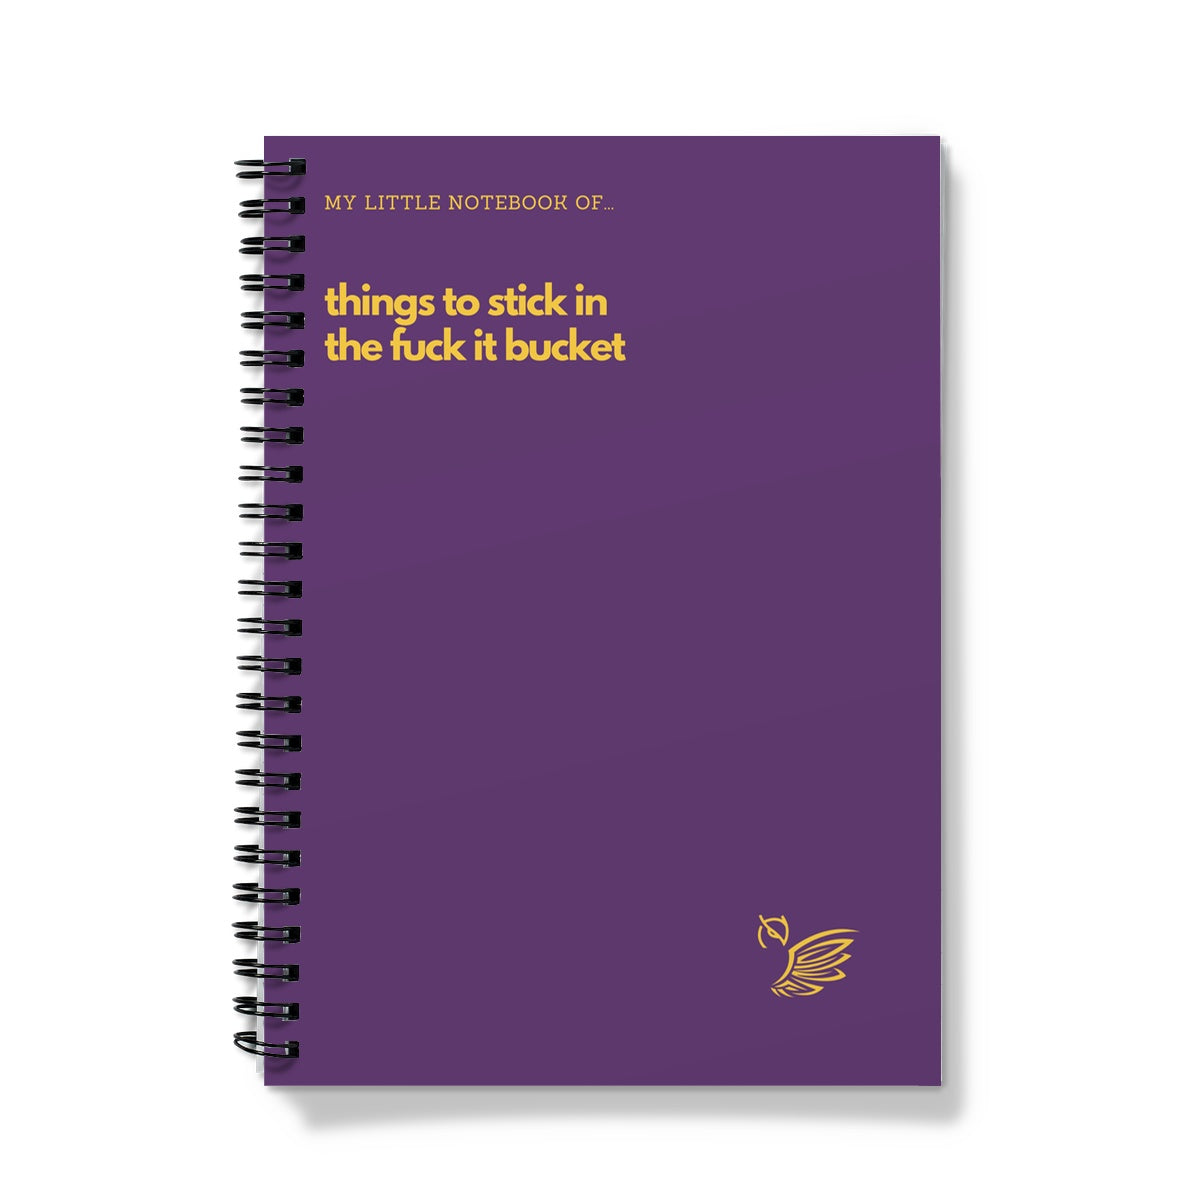 My Little Notebook Of... Things To Stick In The Fuck It Bucket Notebook